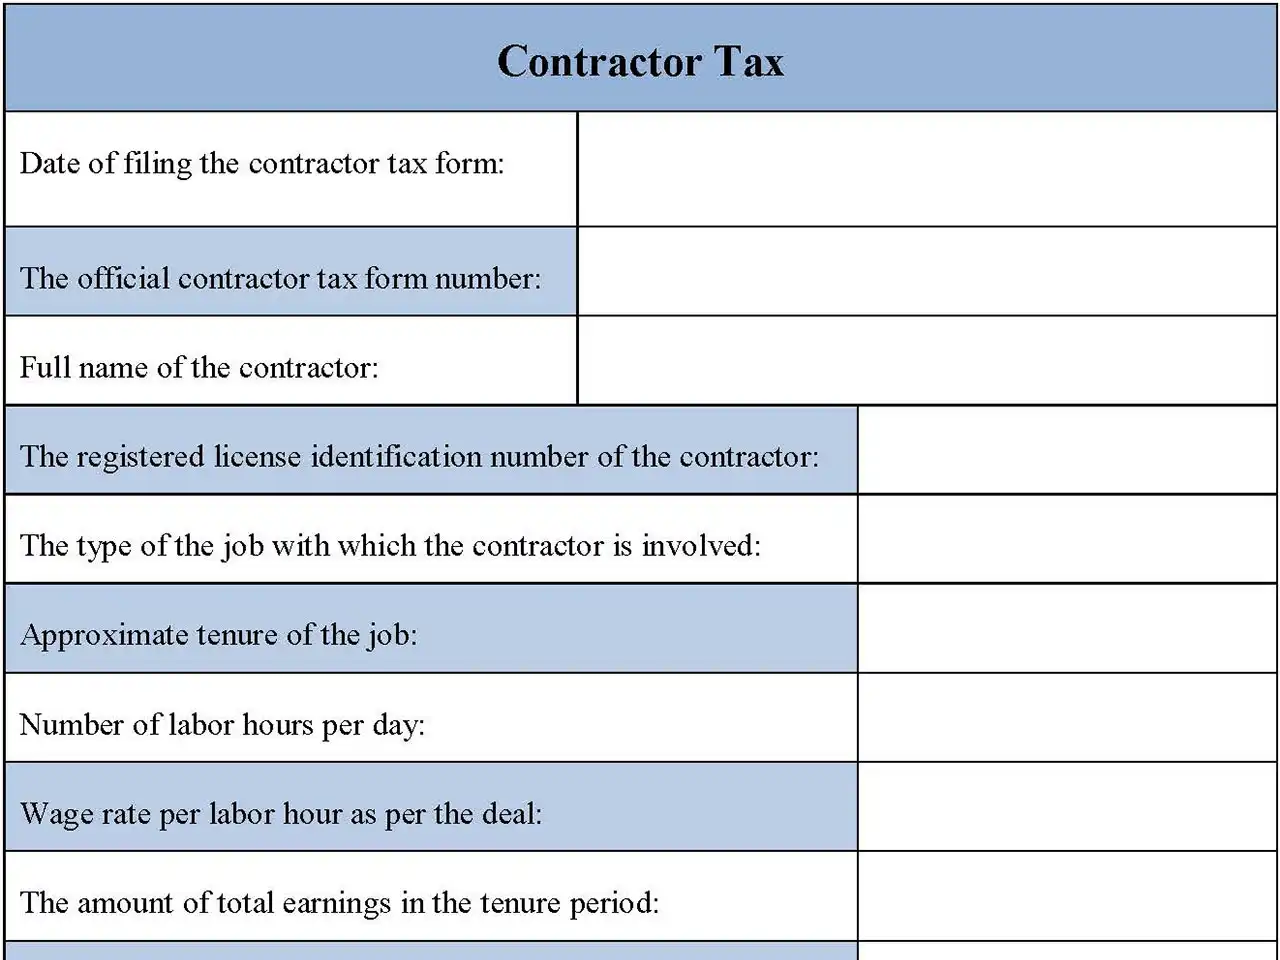 Contractor Tax Form